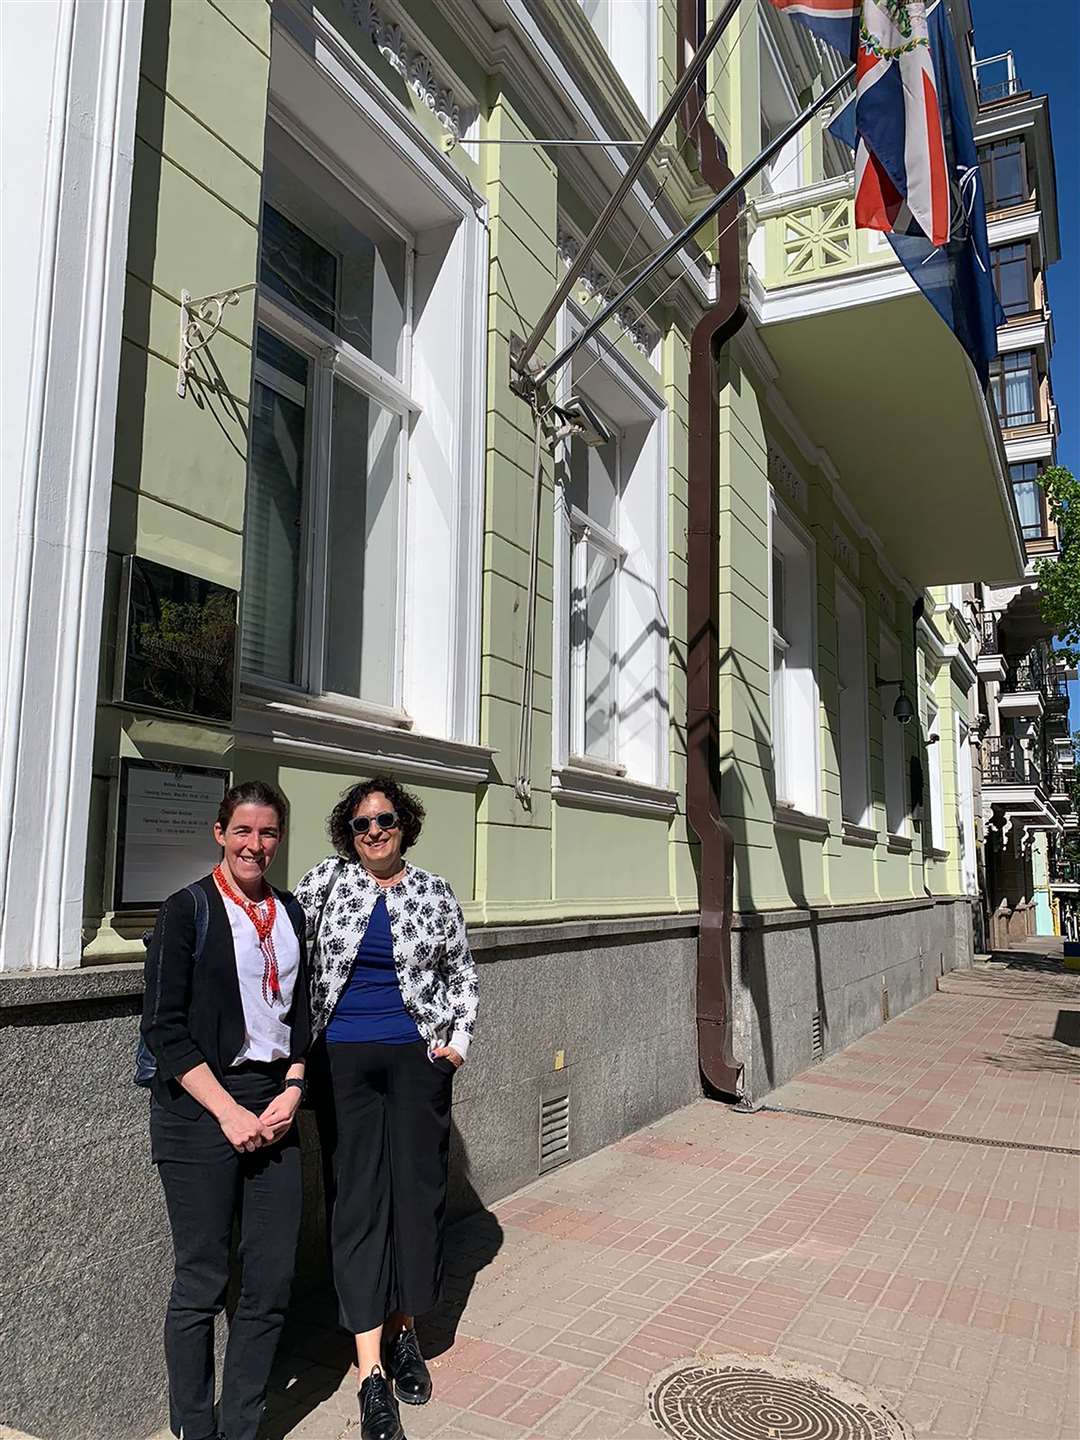 Kate Davenport and Melinda Simmons outside the British embassy in Kyiv (Foreign, Commonwealth & Development Office/PA)